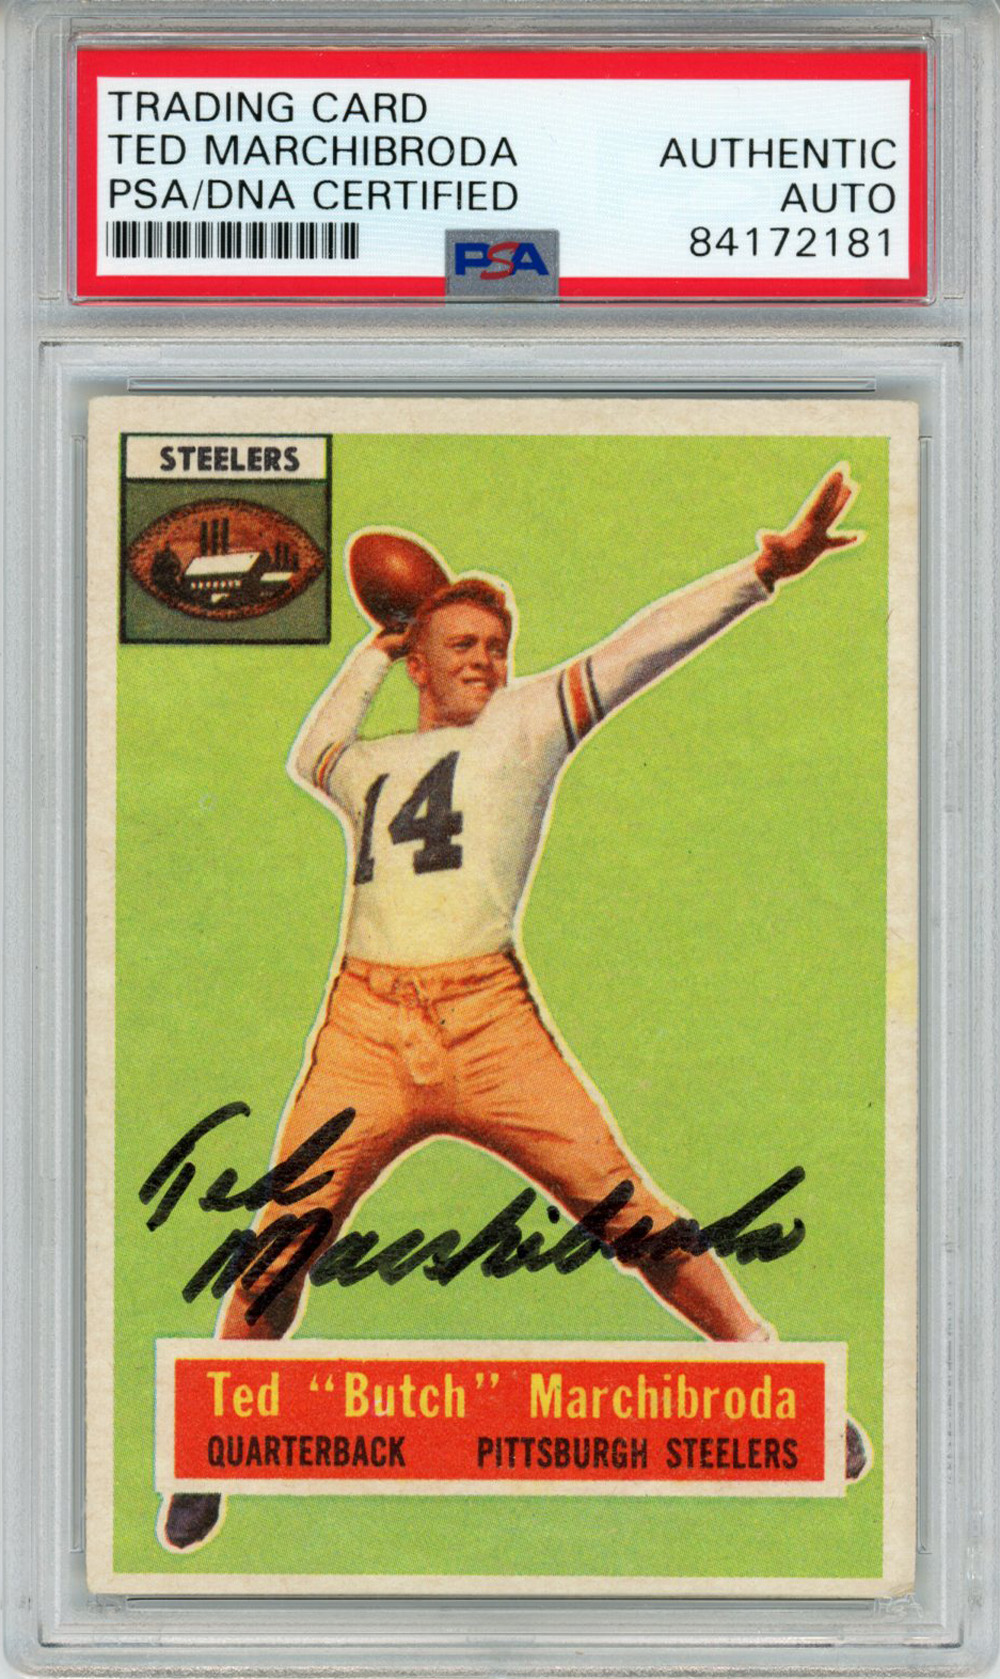 Ted Marchibroda Autographed 1956 Topps #51 Trading Card PSA Slab